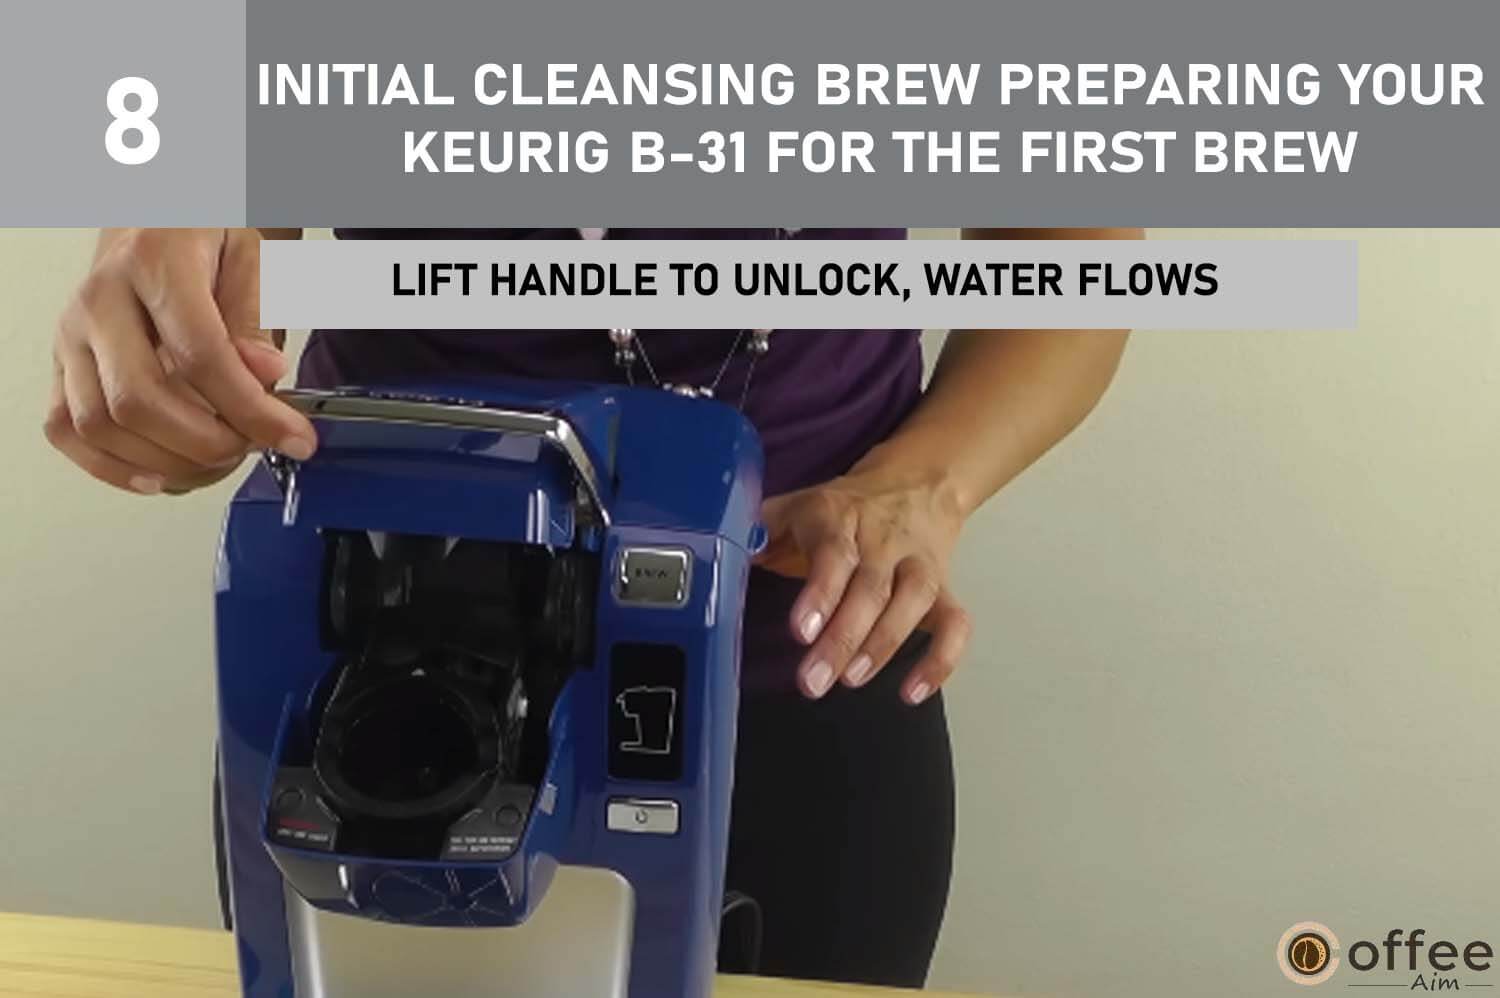 This image illustrates the action of "Lift the Brewer Handle to initiate water flow" as part of the "Initial Cleansing Brew: Preparing Your Keurig B-31 for the First Brew" process outlined in the article "How To Use Keurig B-31